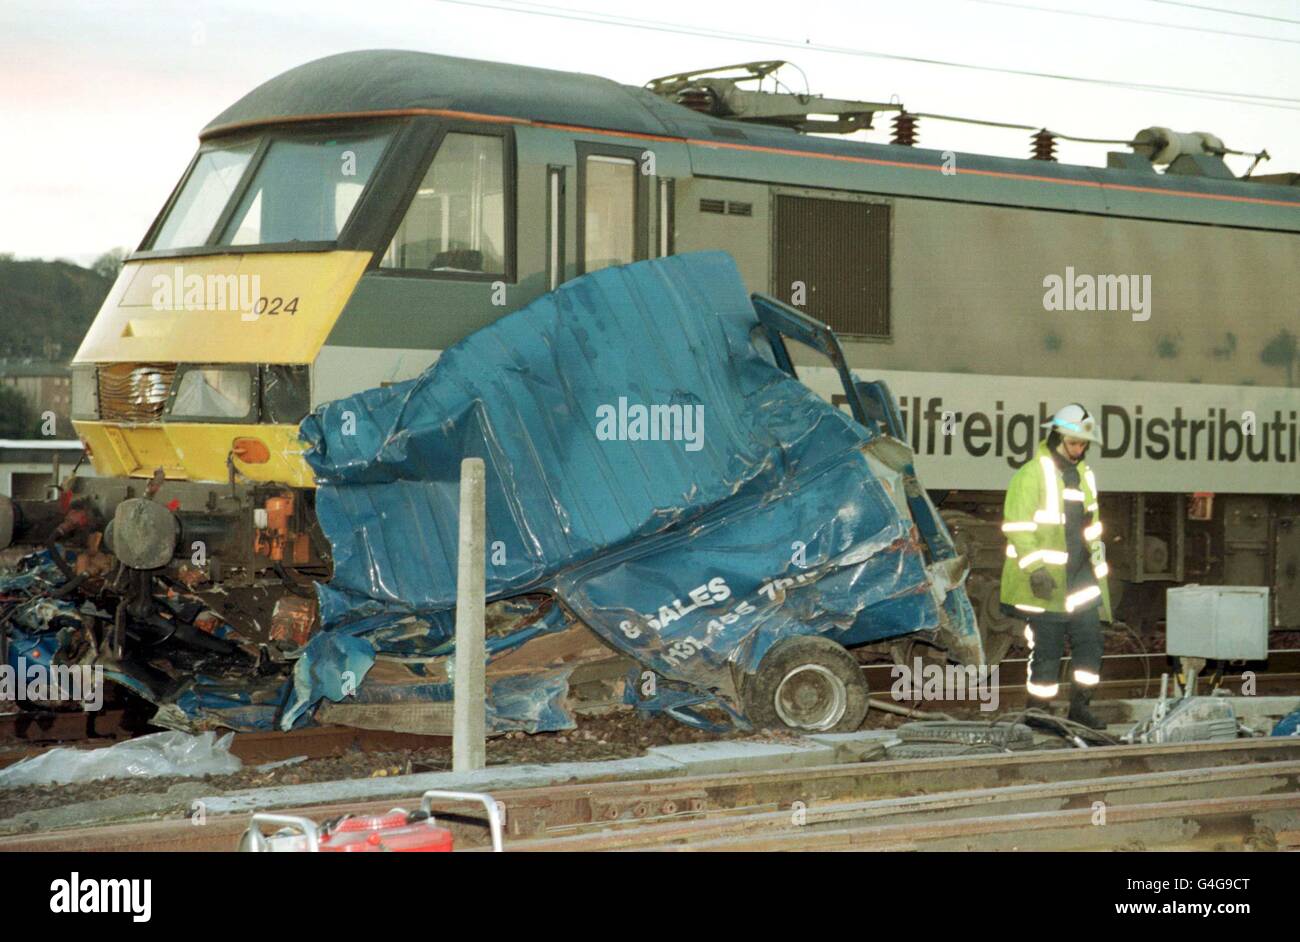 The scene at Slateford in Edinburgh early today Monday 16th November, 1998, where the London to Inverness sleeper crashed into two abandoned vans on the stretch of railway line near Edinburgh. The sleeper was carrying 140 passengers when it crashed, but no-one was hurt police said Photo by Tony J Haresign. See PA story Stock Photo